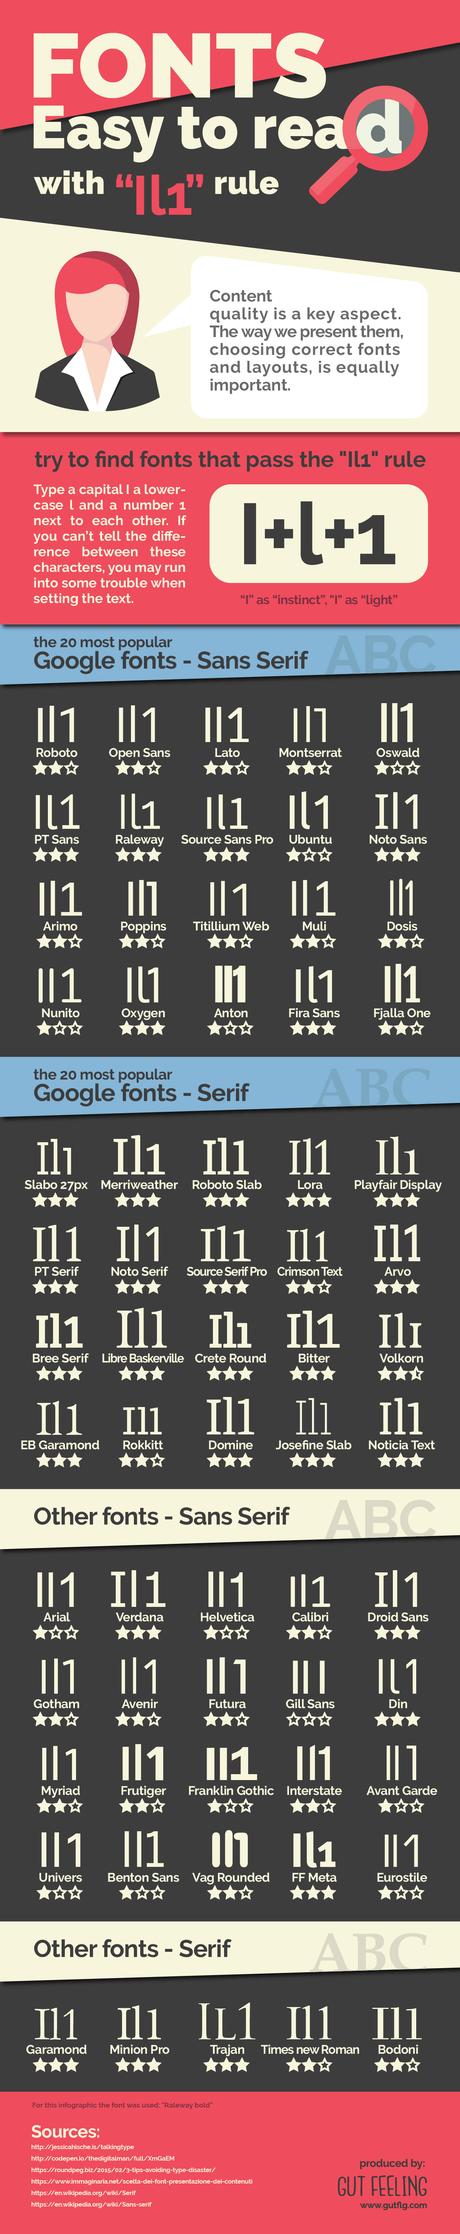 fonts-easy-to-read-paperblog